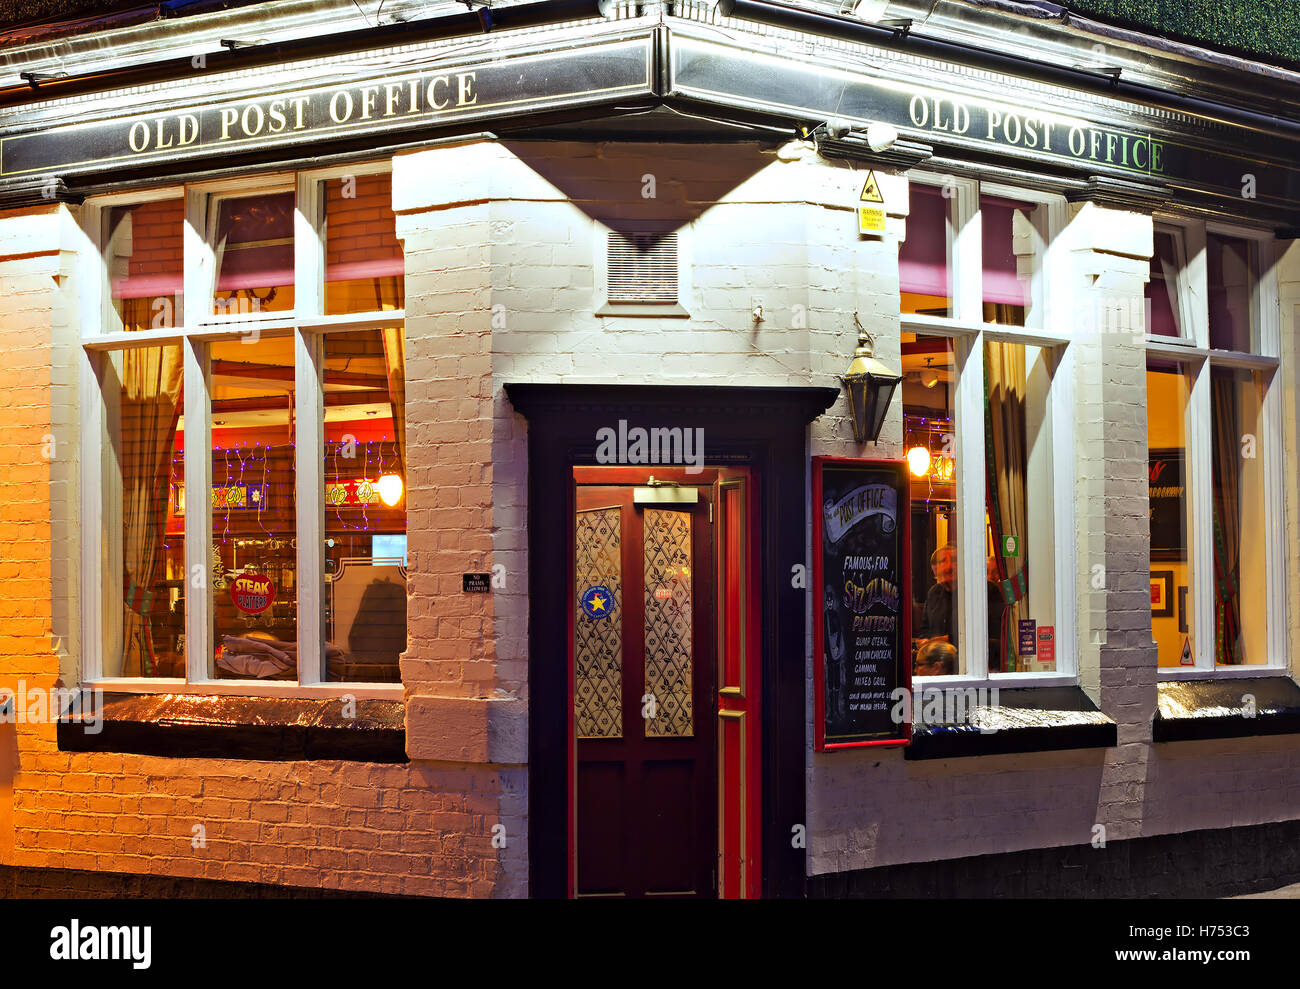 The 'Old Post Office' public house in School Lane, Liverpool city centre, at night. Stock Photo